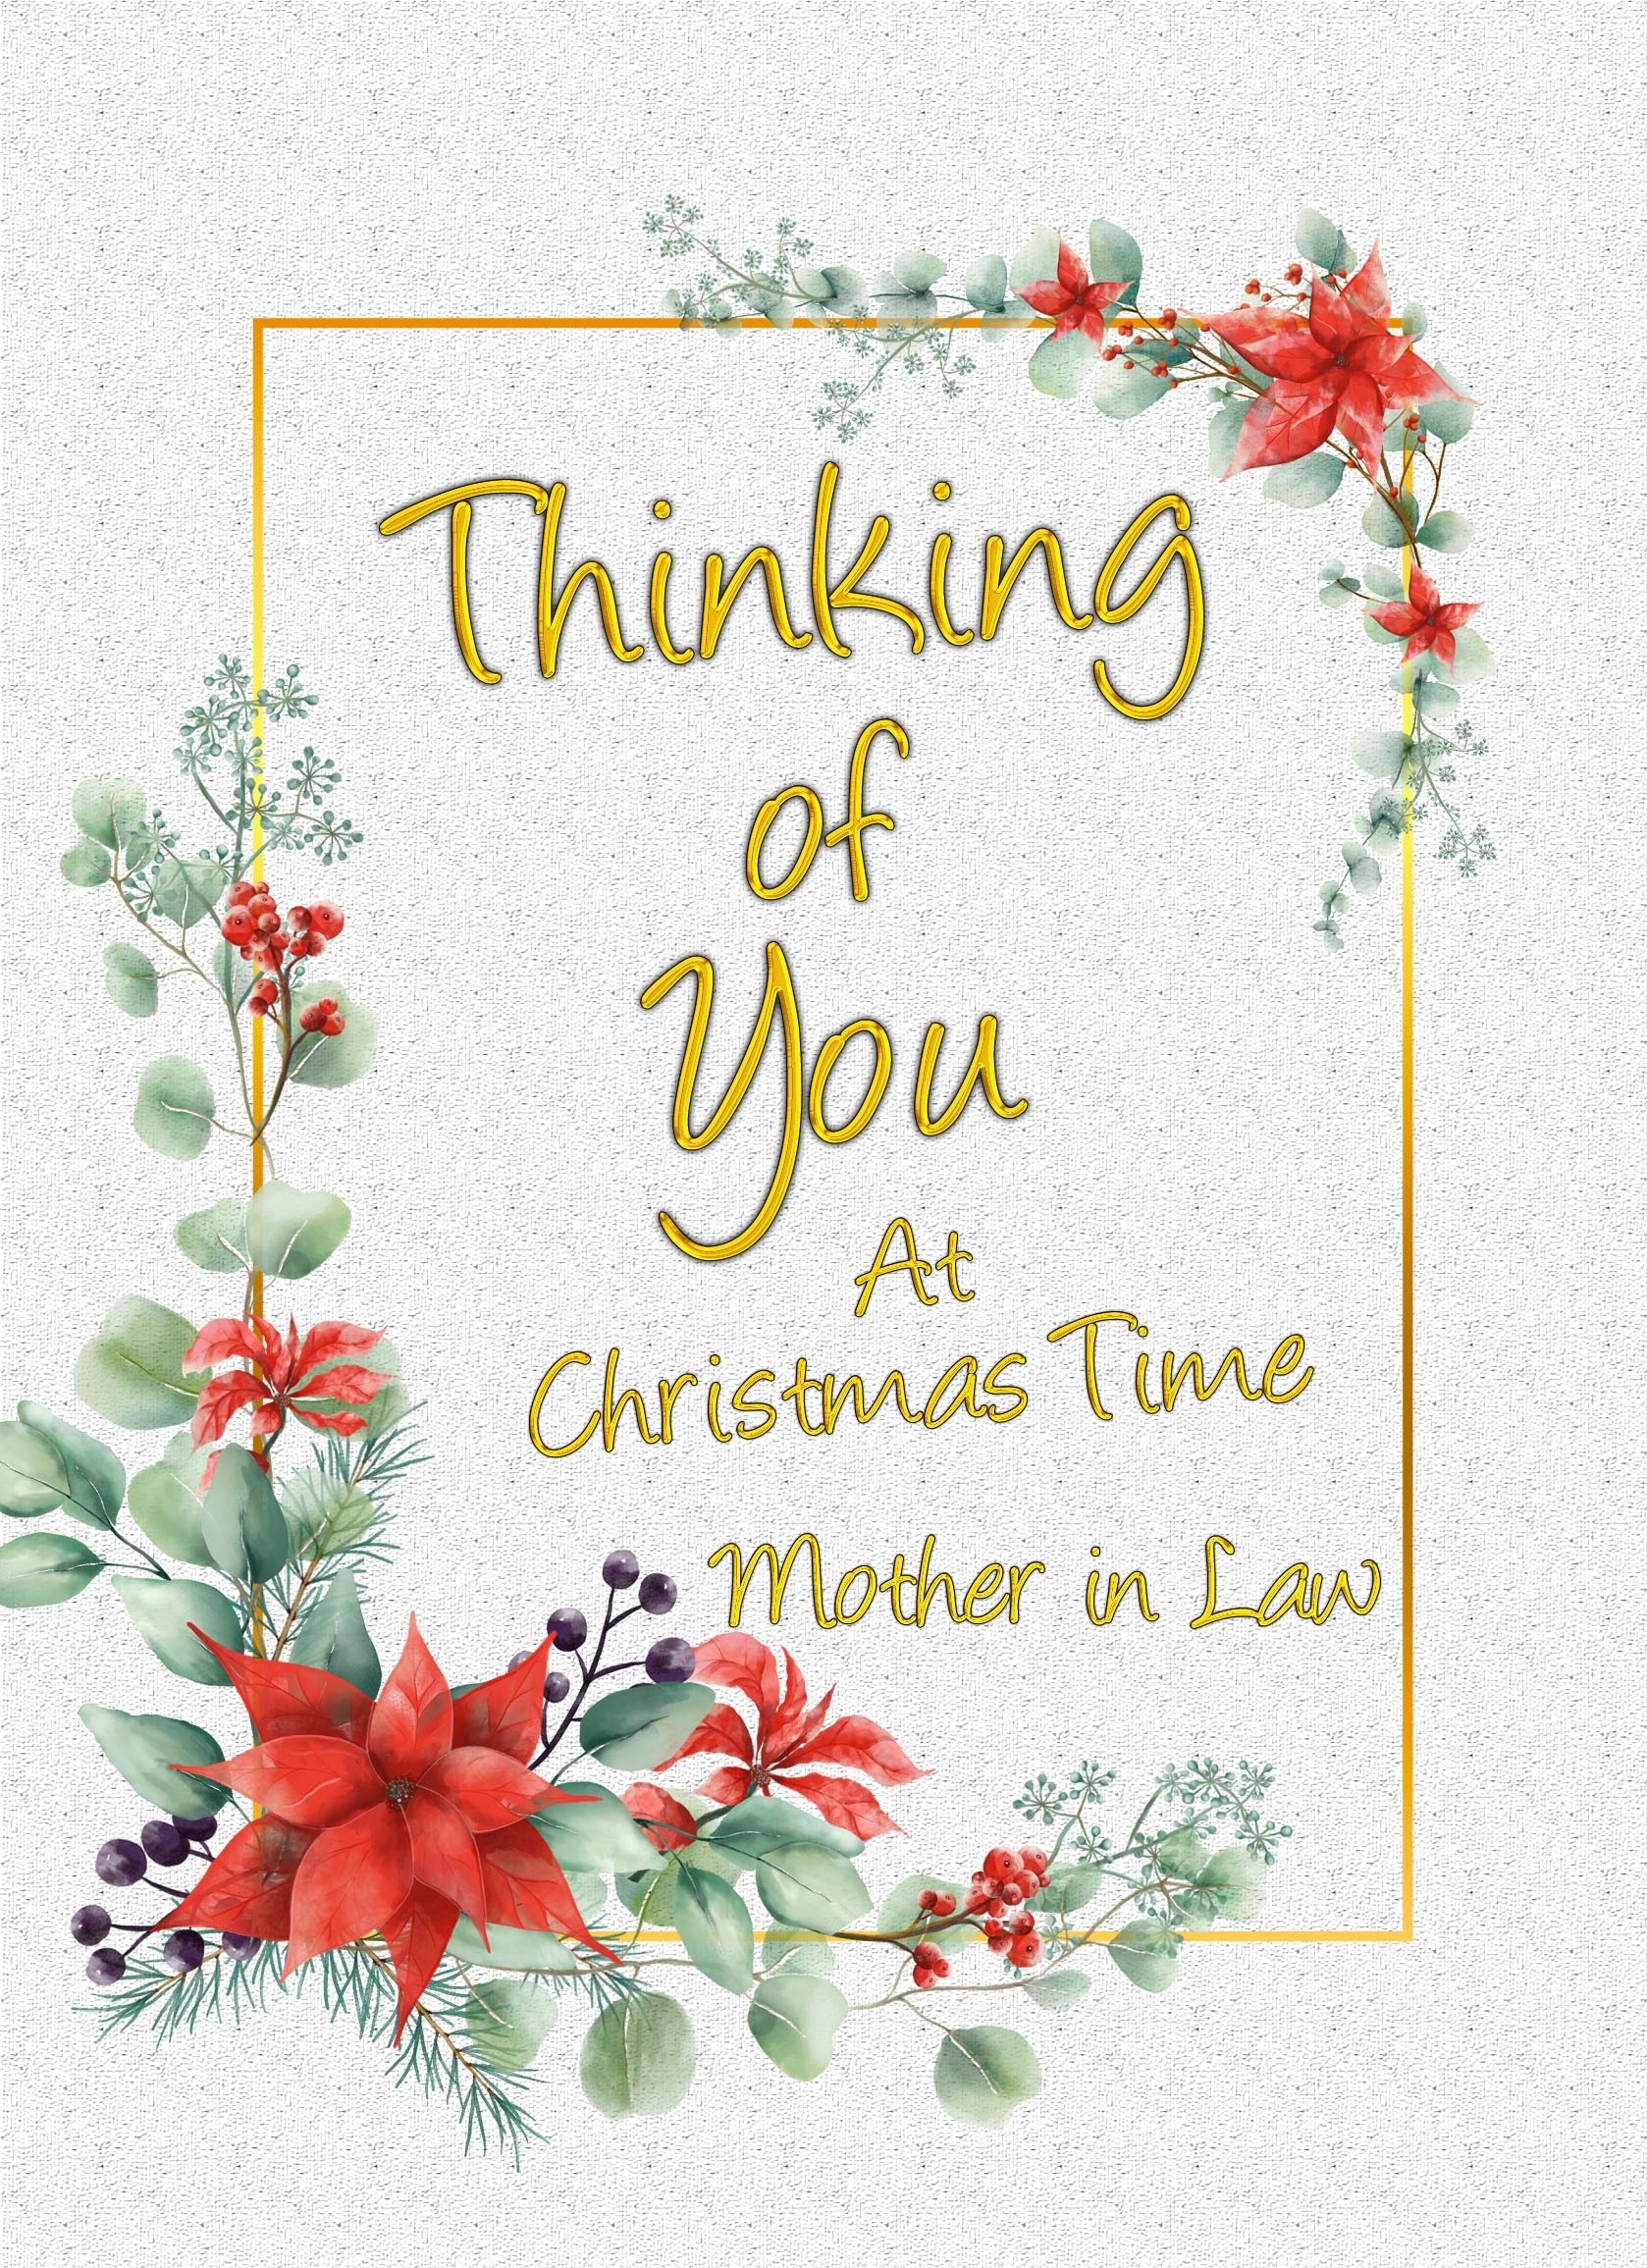 Thinking of You at Christmas Card For Mother in Law